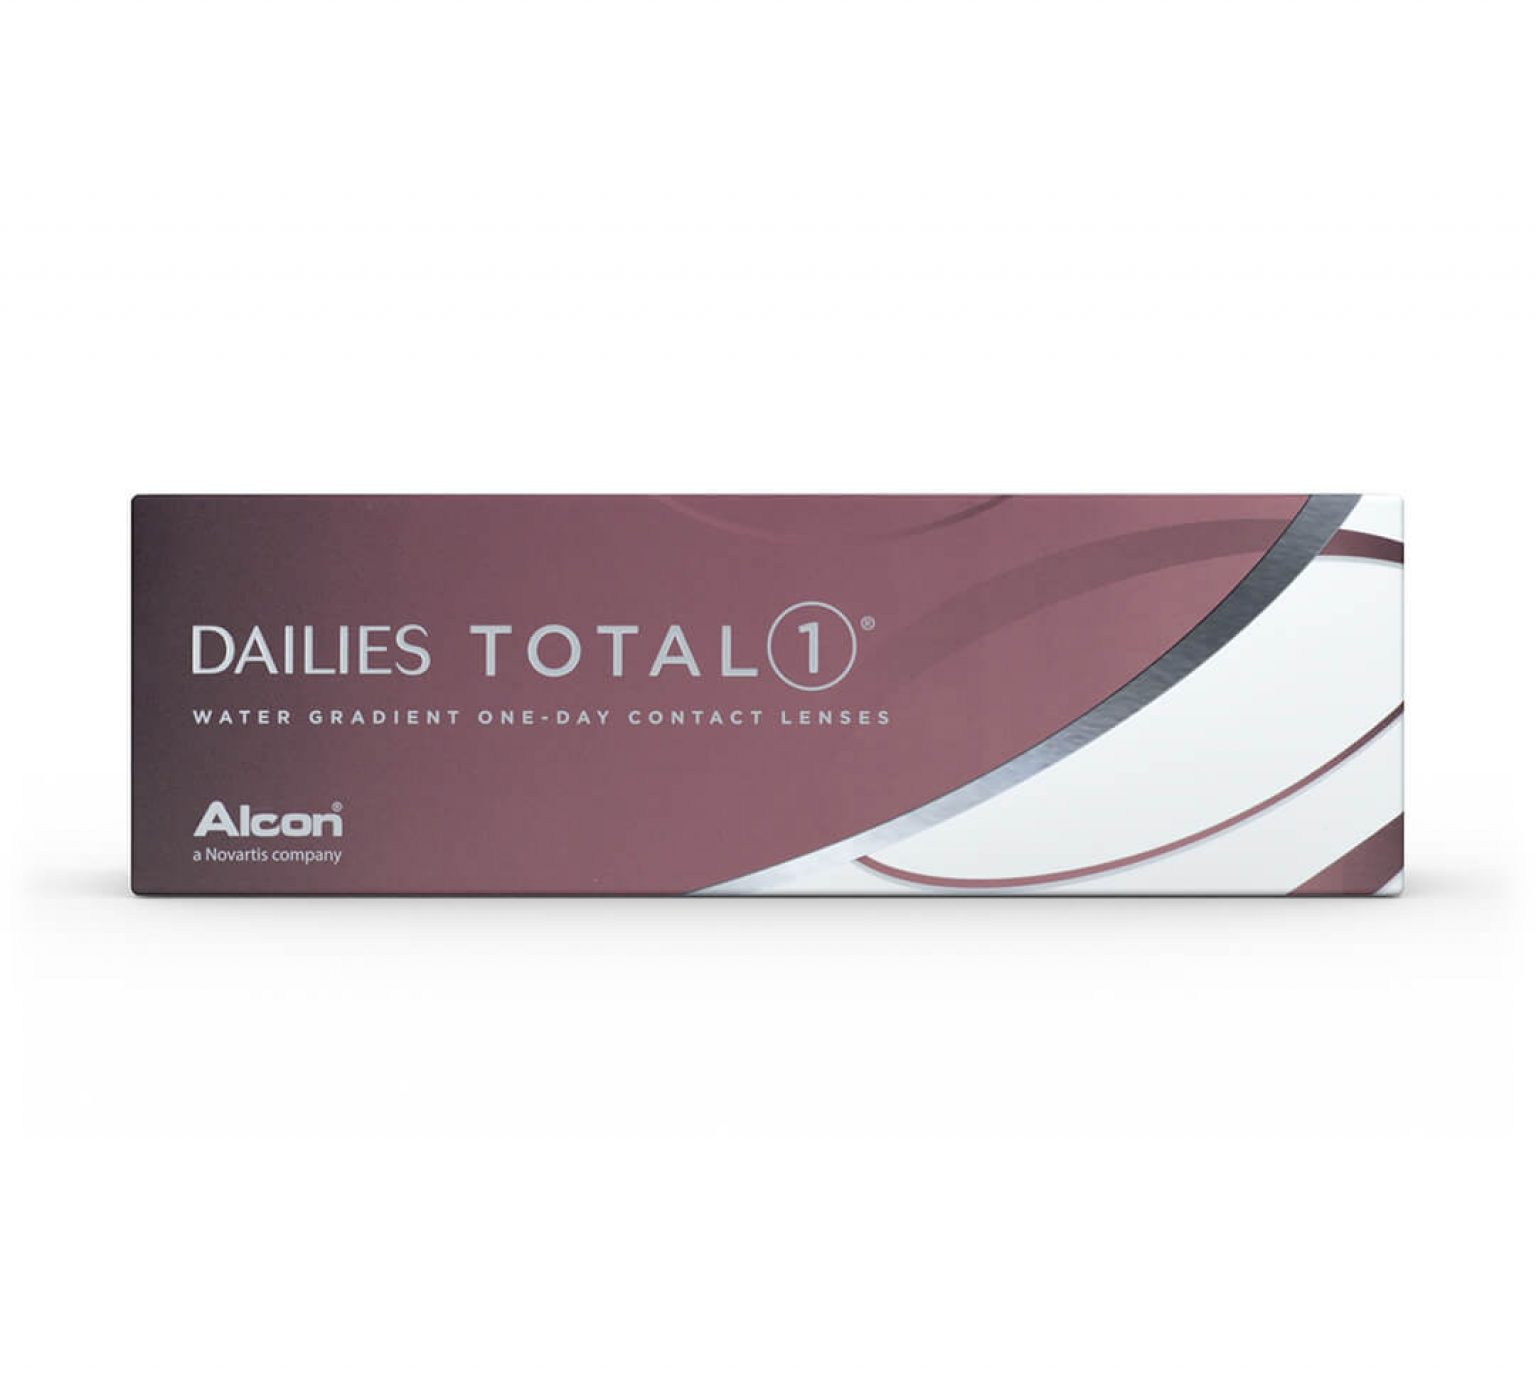 dailies-total-1-contact-lens-price-comparison-new-zealand